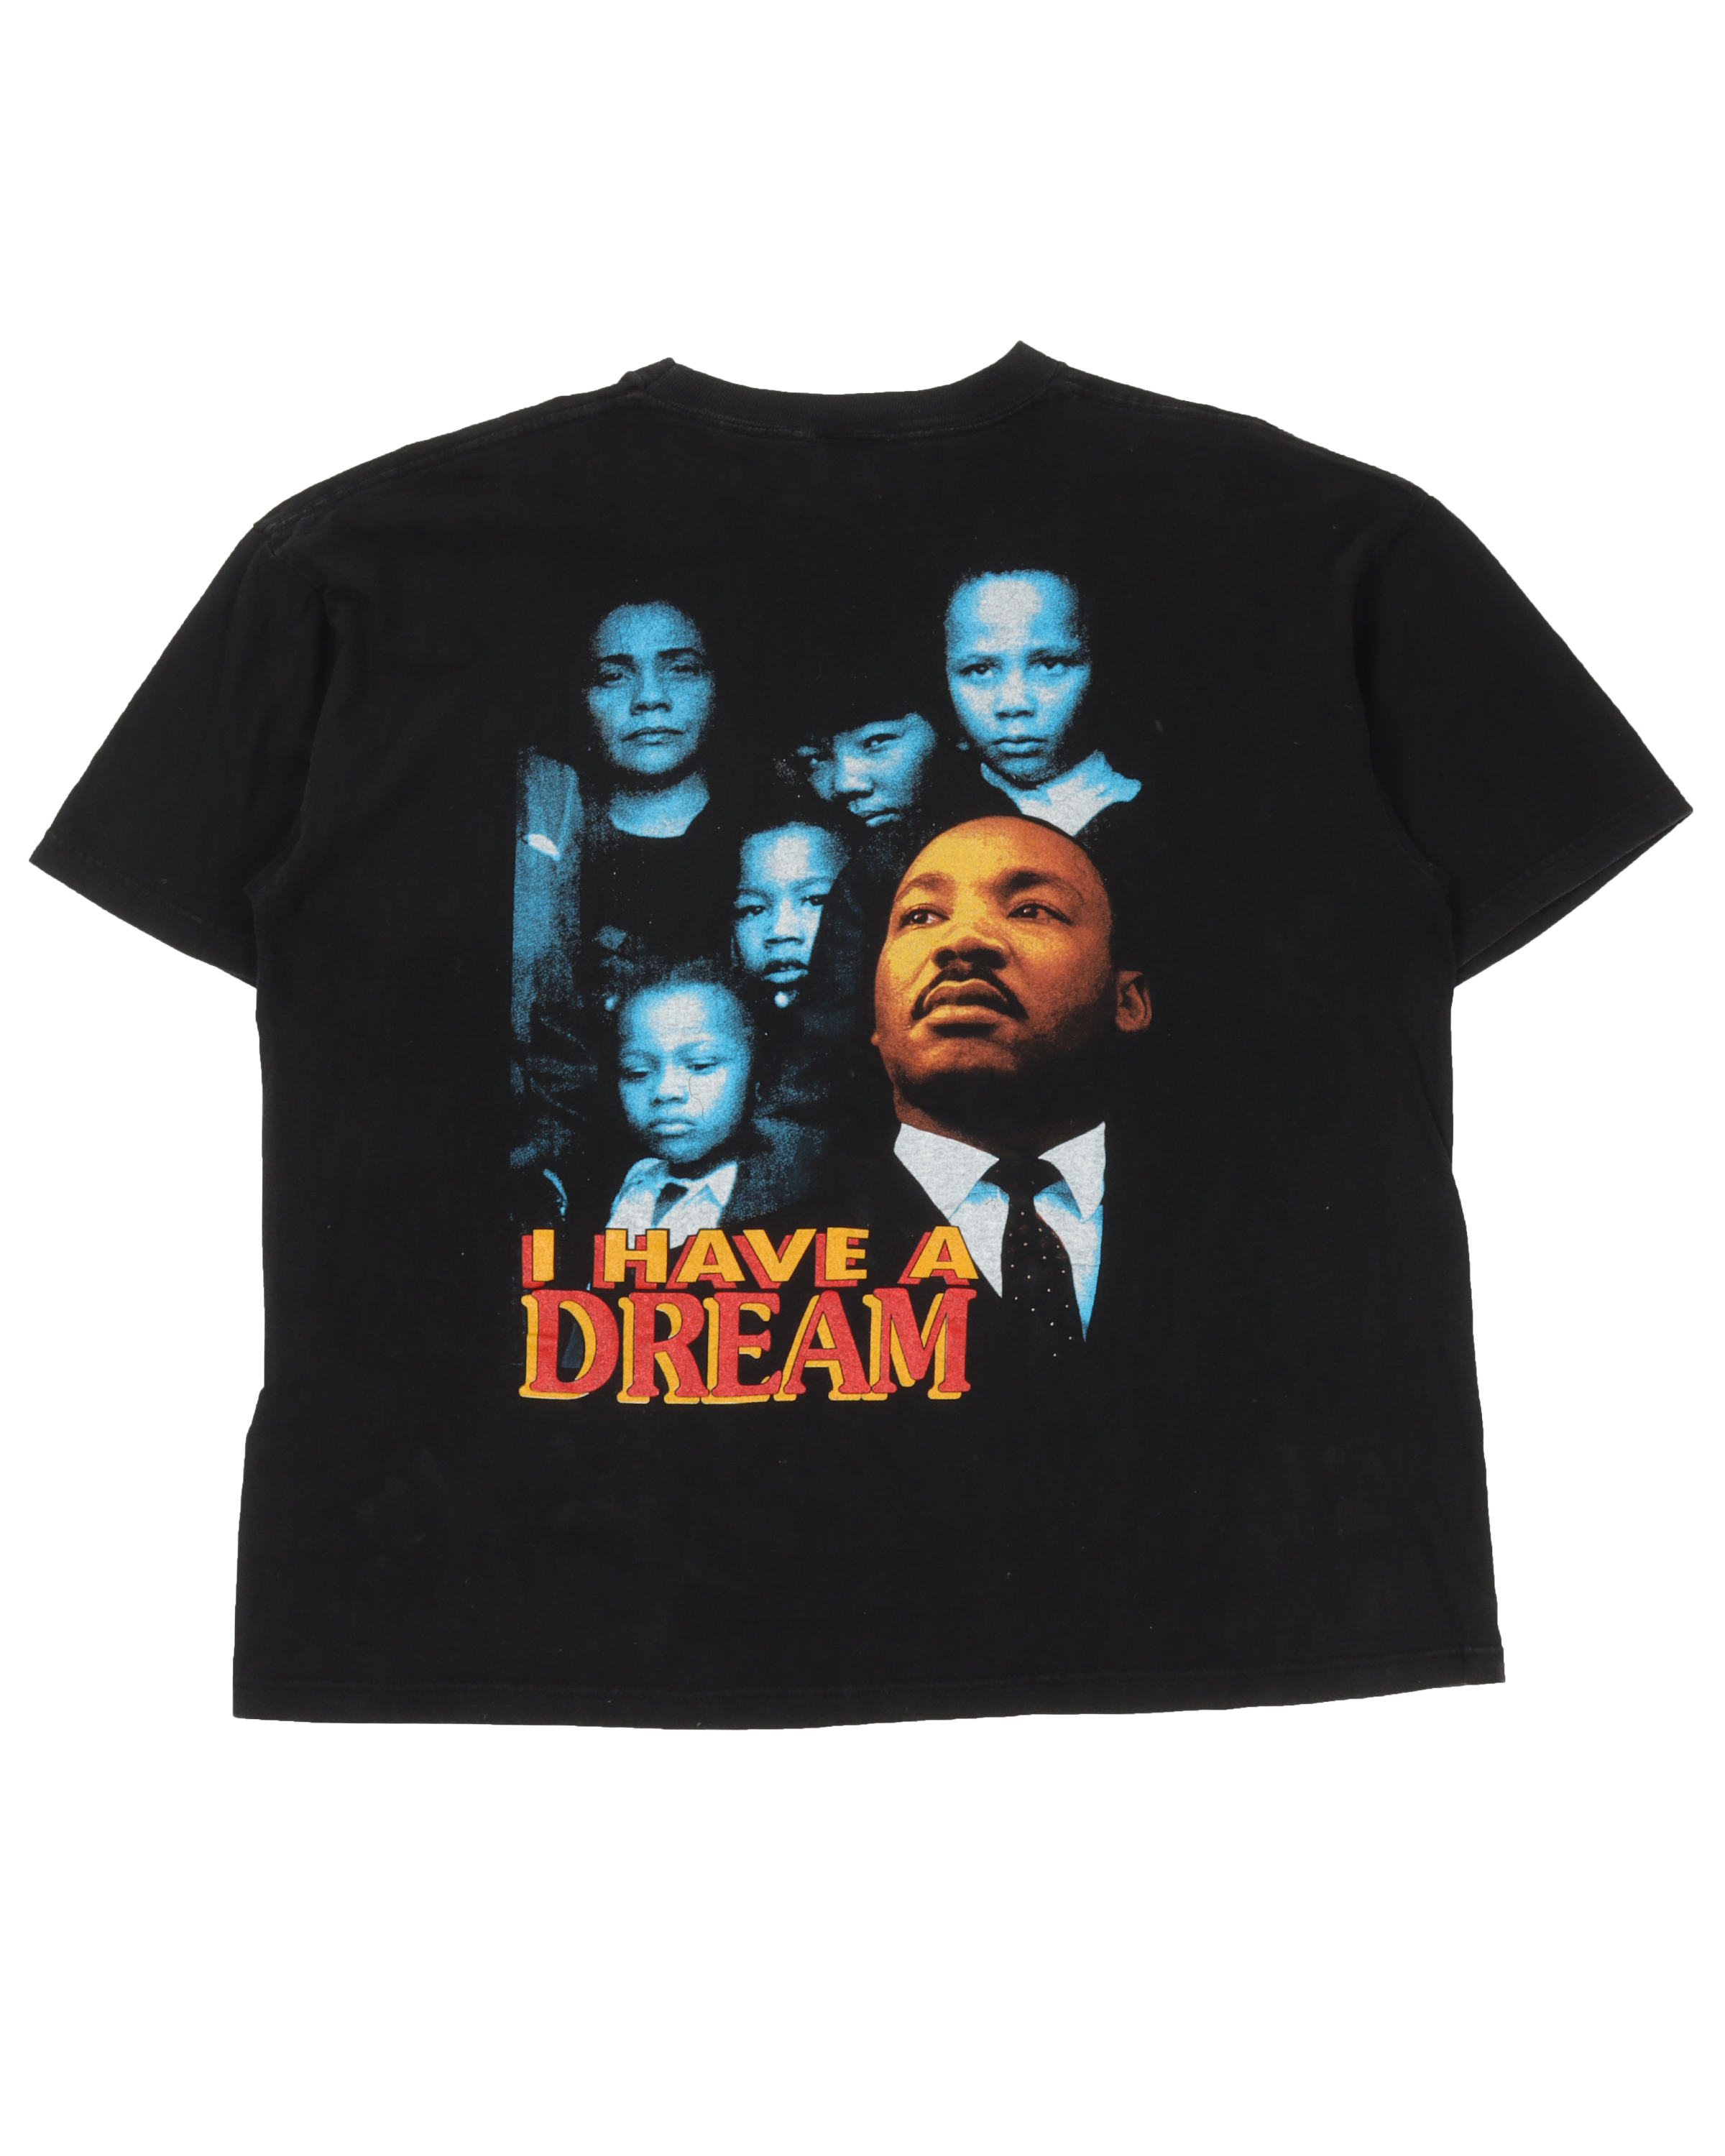 Martin Luther King Jr. "I Have a Dream" T-Shirt